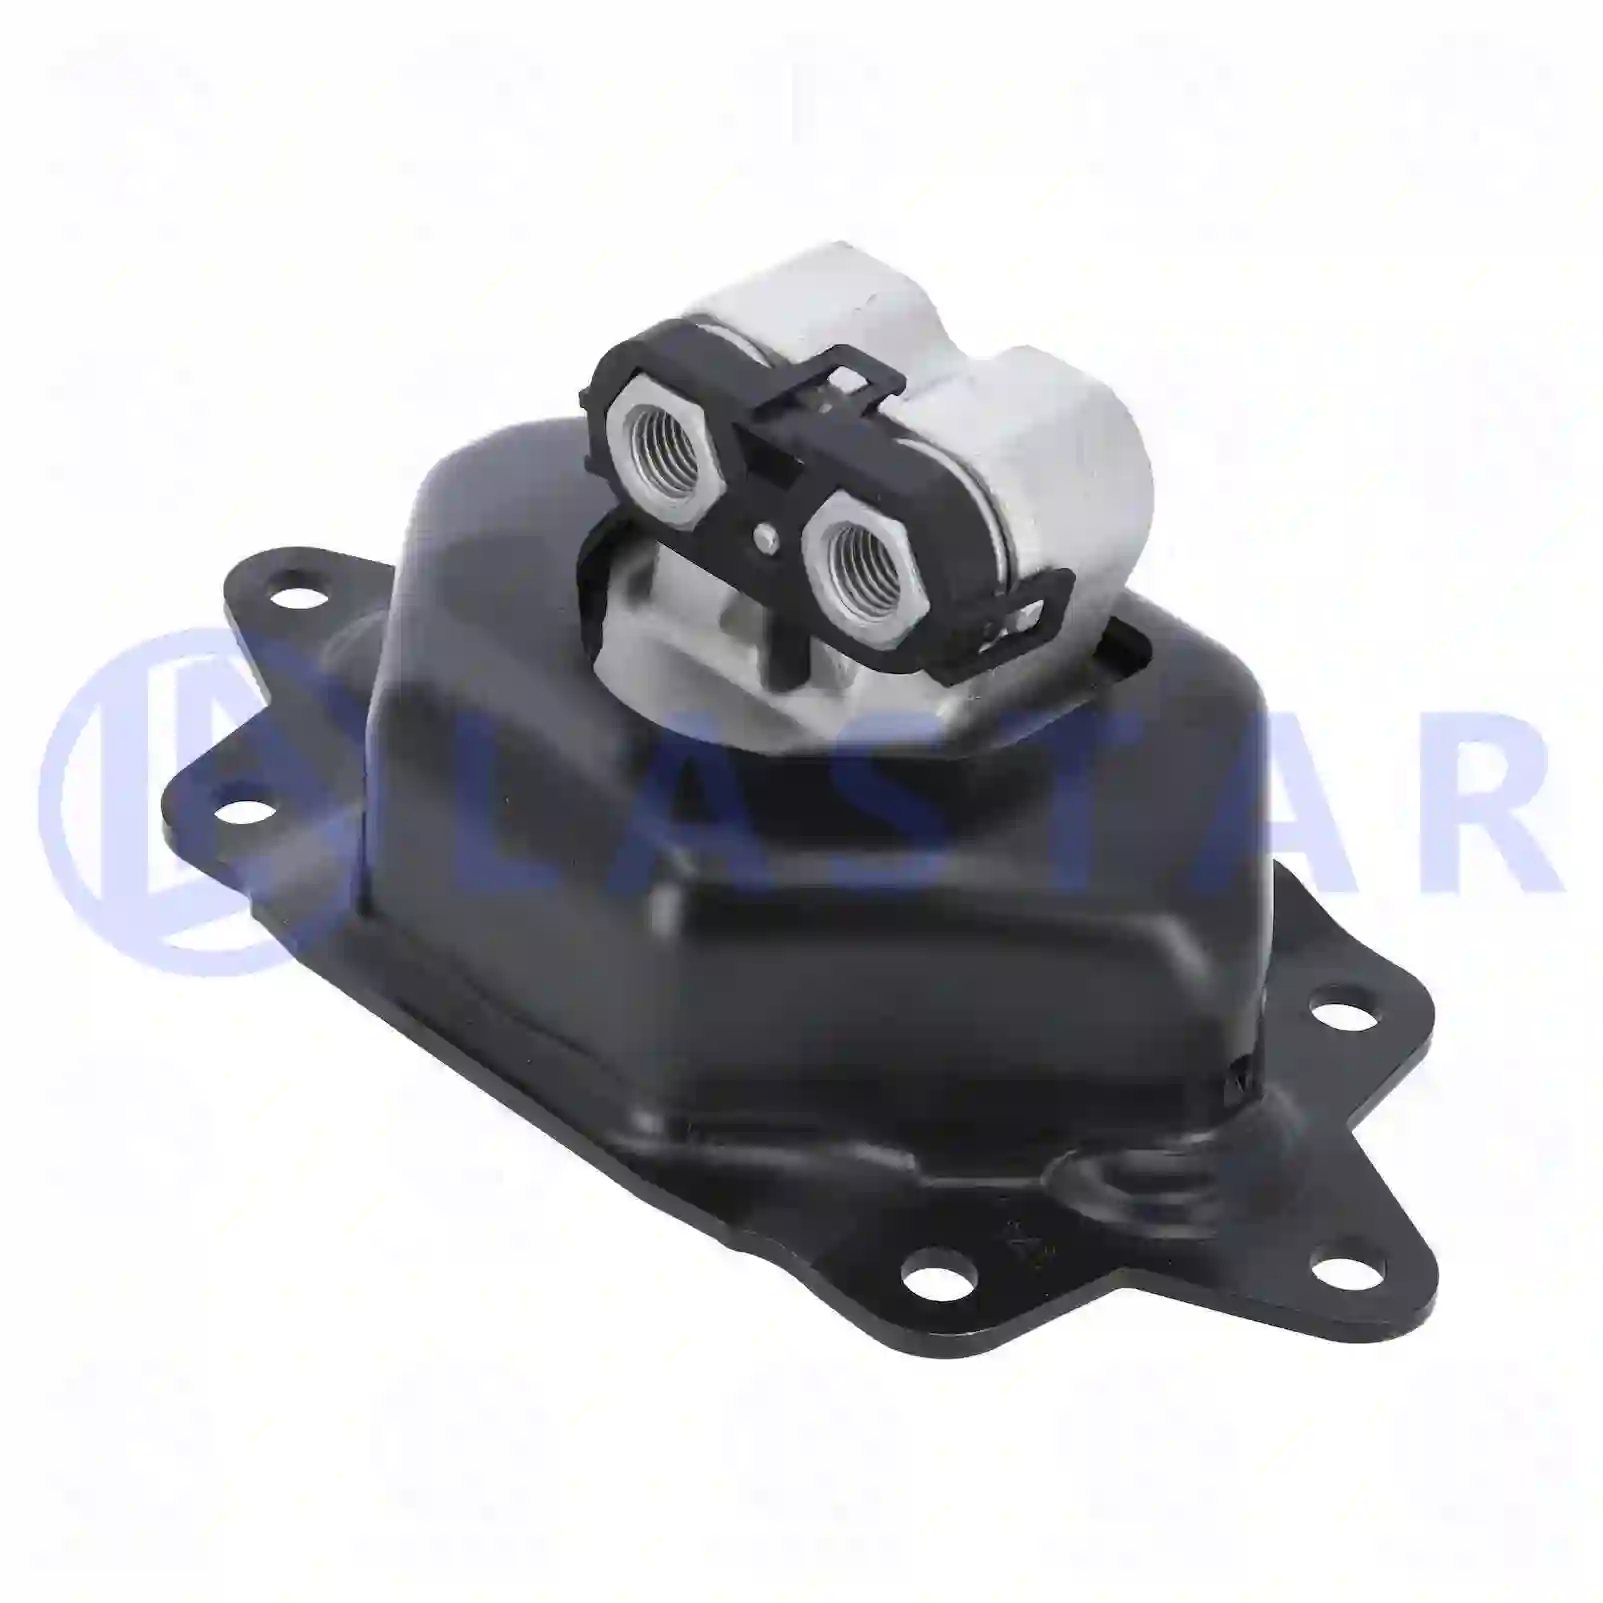 Engine mounting, rear, 77700241, 7421416526, 21416 ||  77700241 Lastar Spare Part | Truck Spare Parts, Auotomotive Spare Parts Engine mounting, rear, 77700241, 7421416526, 21416 ||  77700241 Lastar Spare Part | Truck Spare Parts, Auotomotive Spare Parts